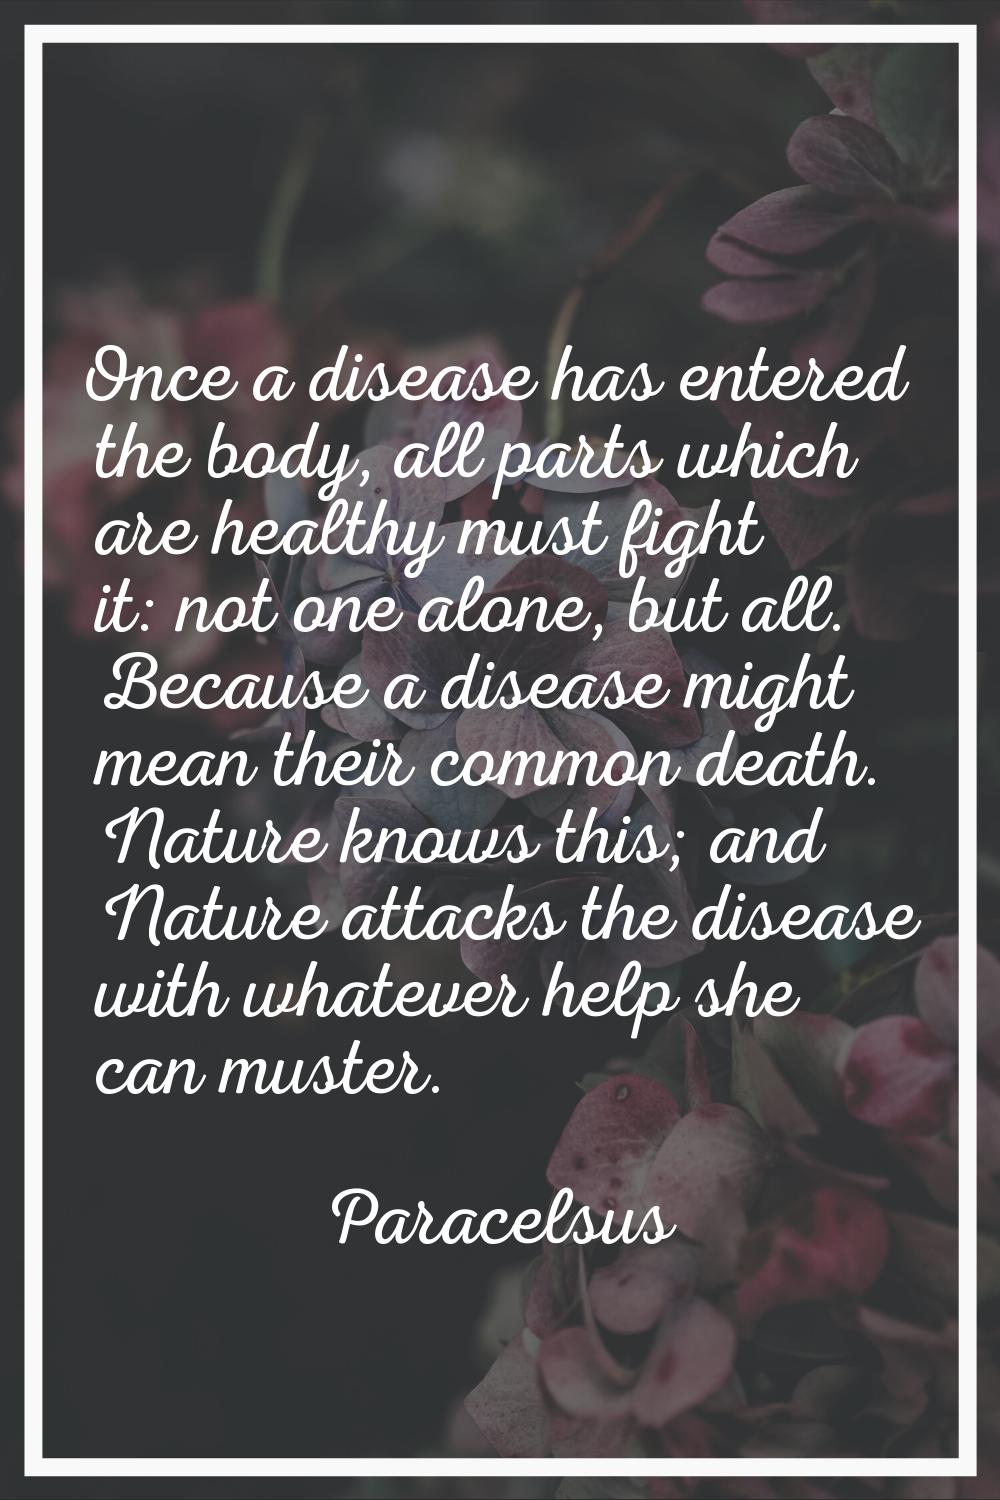 Once a disease has entered the body, all parts which are healthy must fight it: not one alone, but 